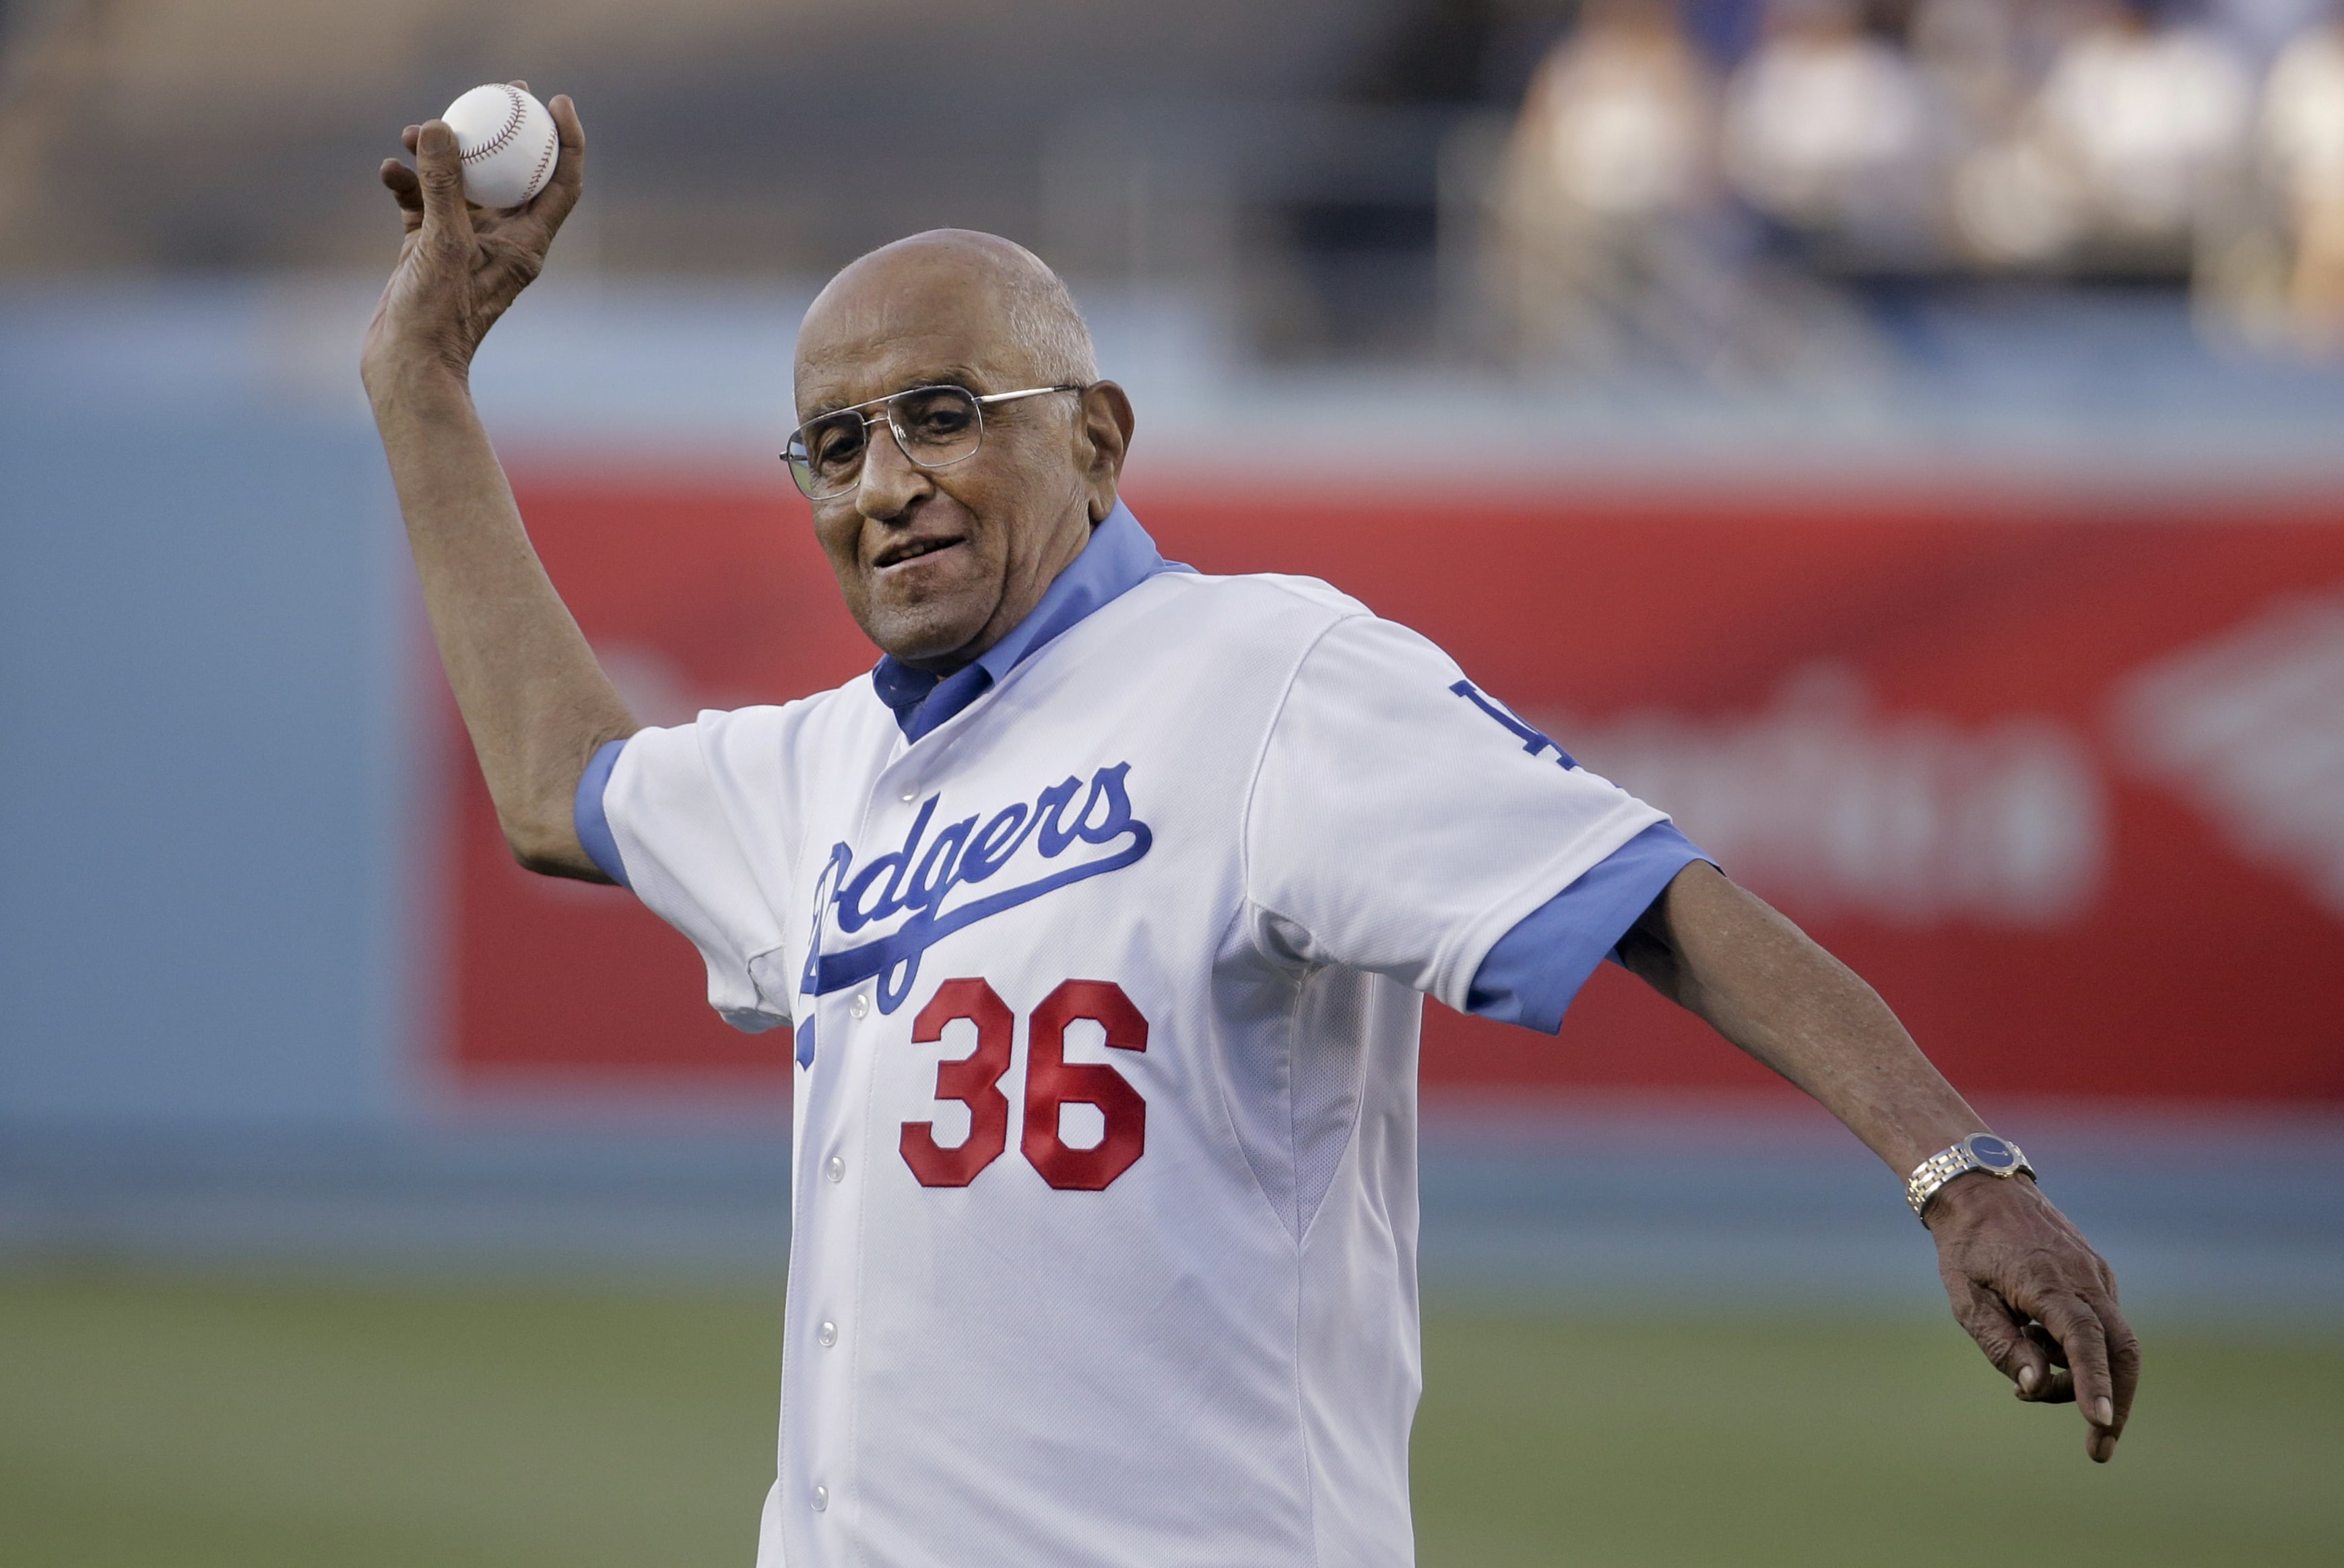 Former Los Angeles Dodgers pitcher Don Newcombe throws a ceremonial pitch before a game between the Los Angeles Dodgers and the Cleveland Indians in 2014. Newcombe died Tuesday, Feb. 19, 2019, after a lengthy illness. He was 92.